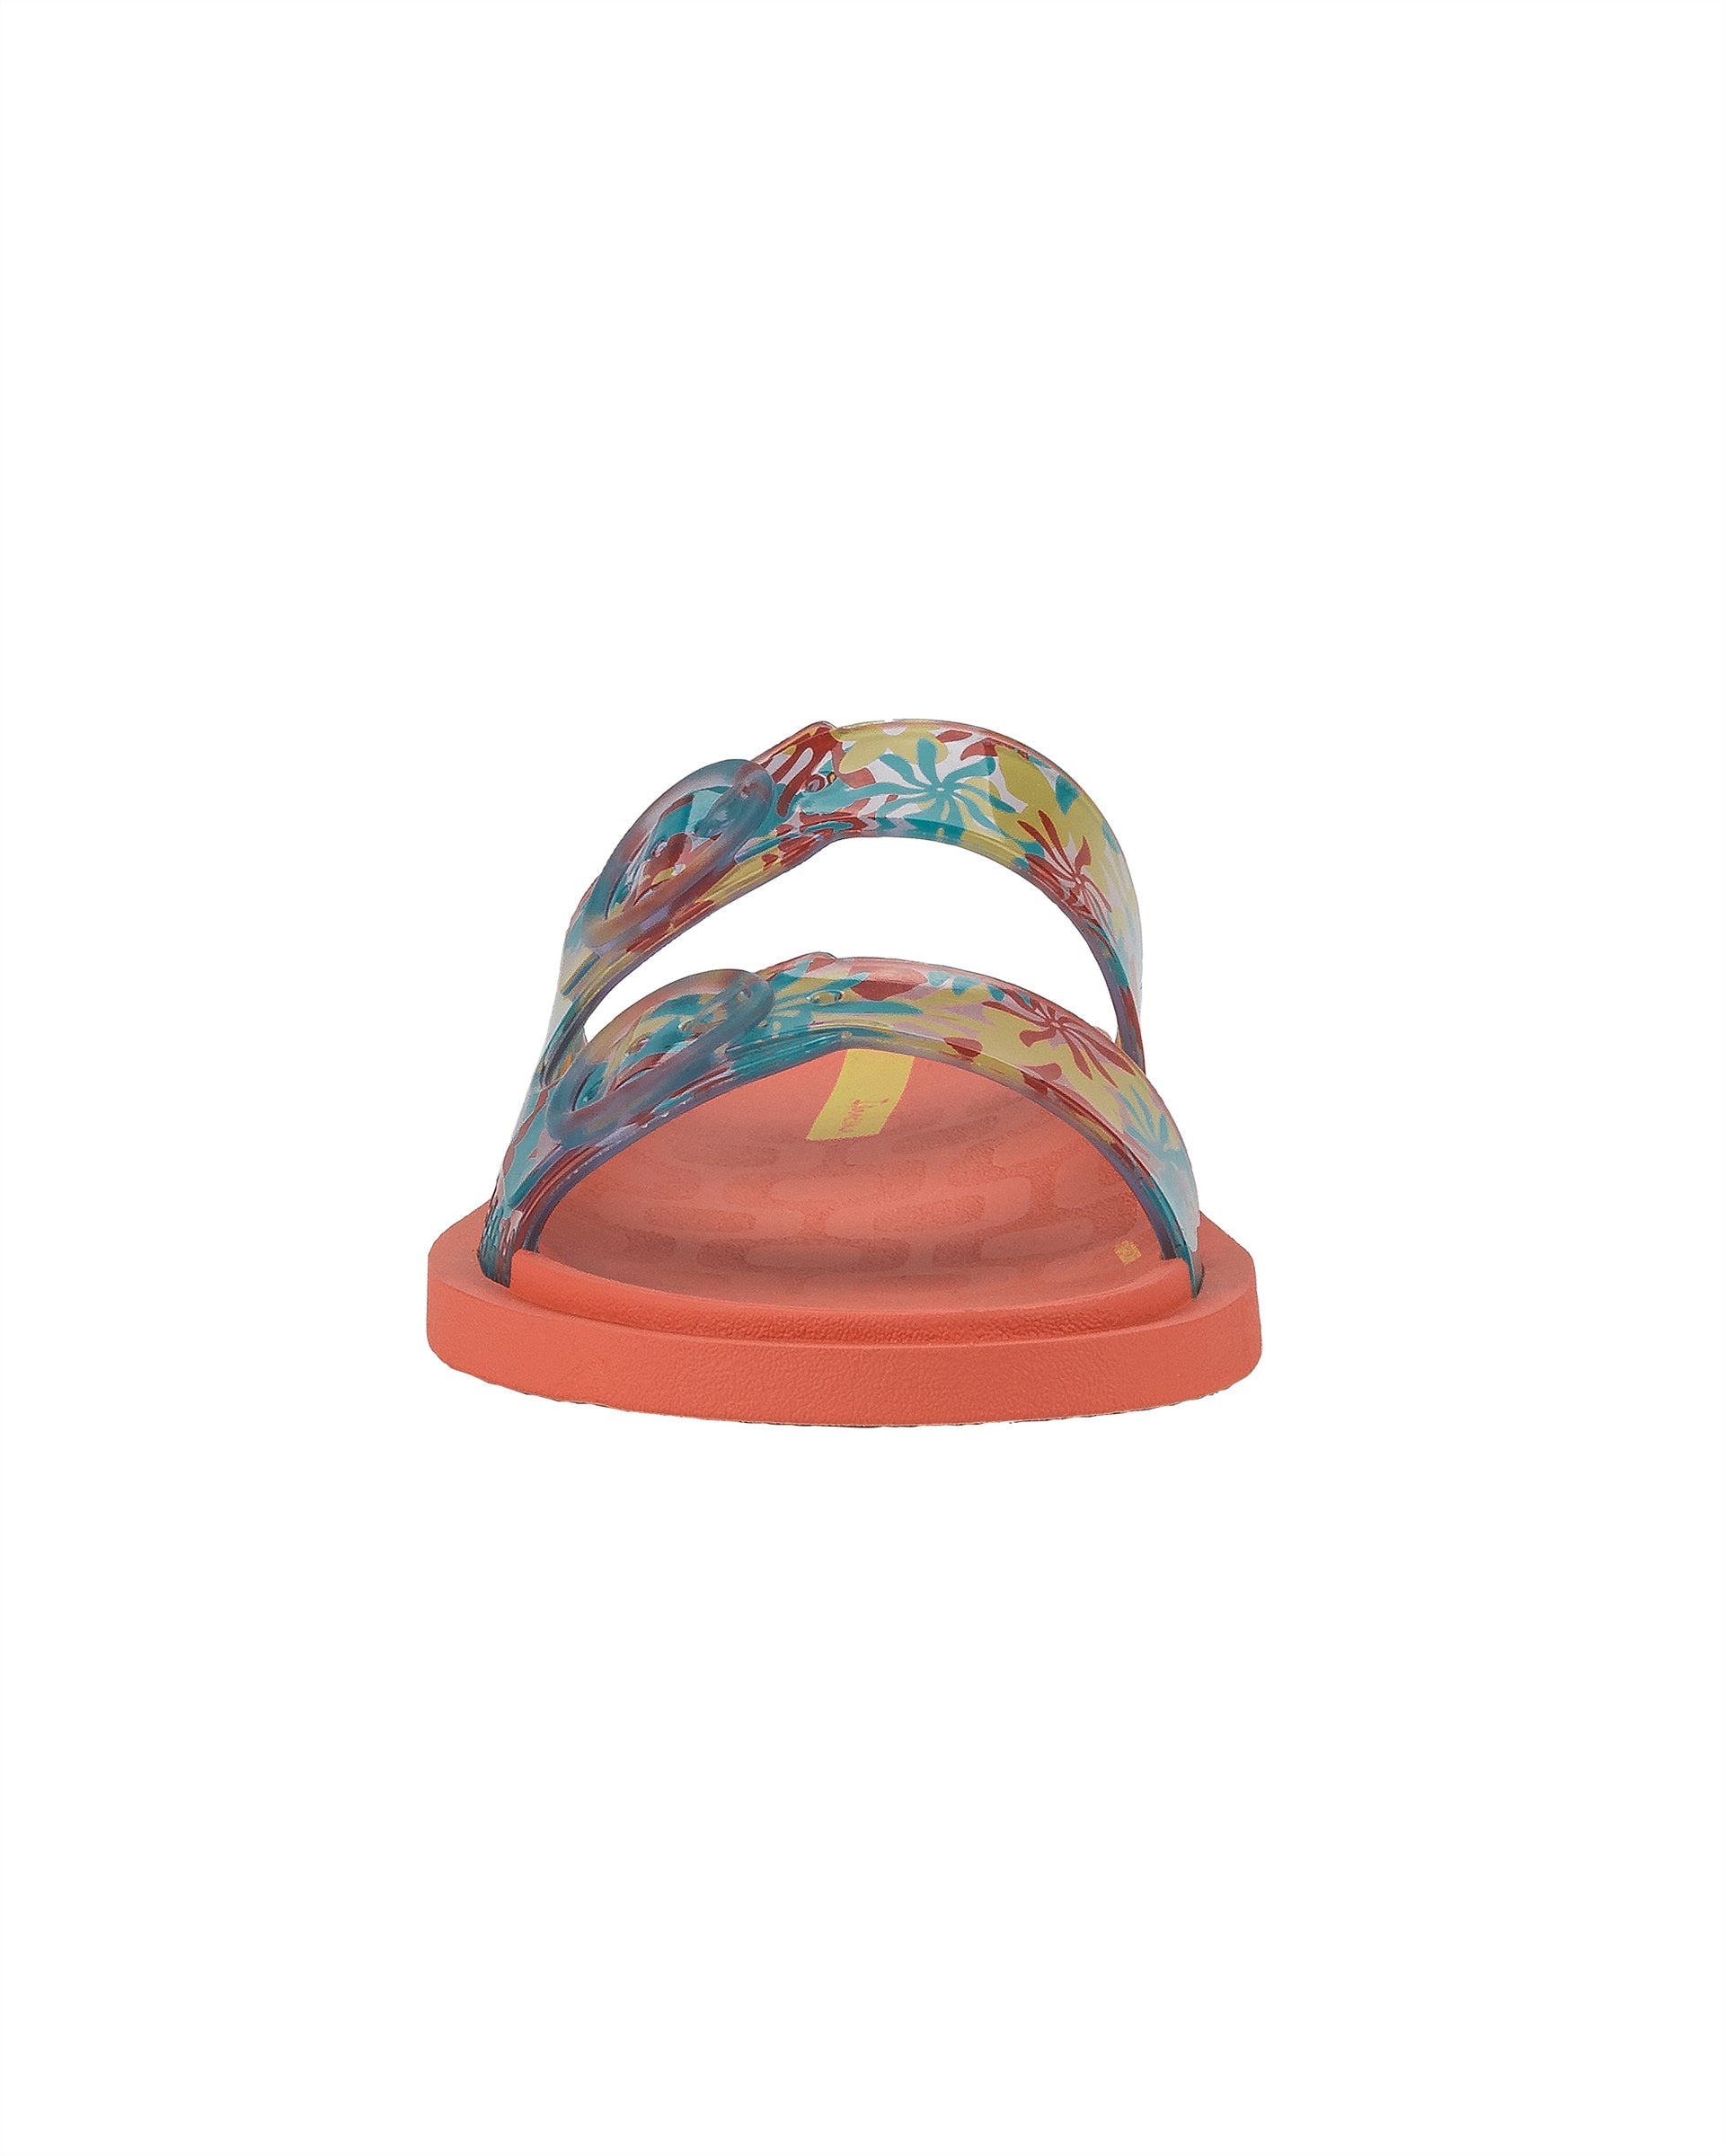 Front view of a orange Ipanema Follow kids slide with floral print on the upper.